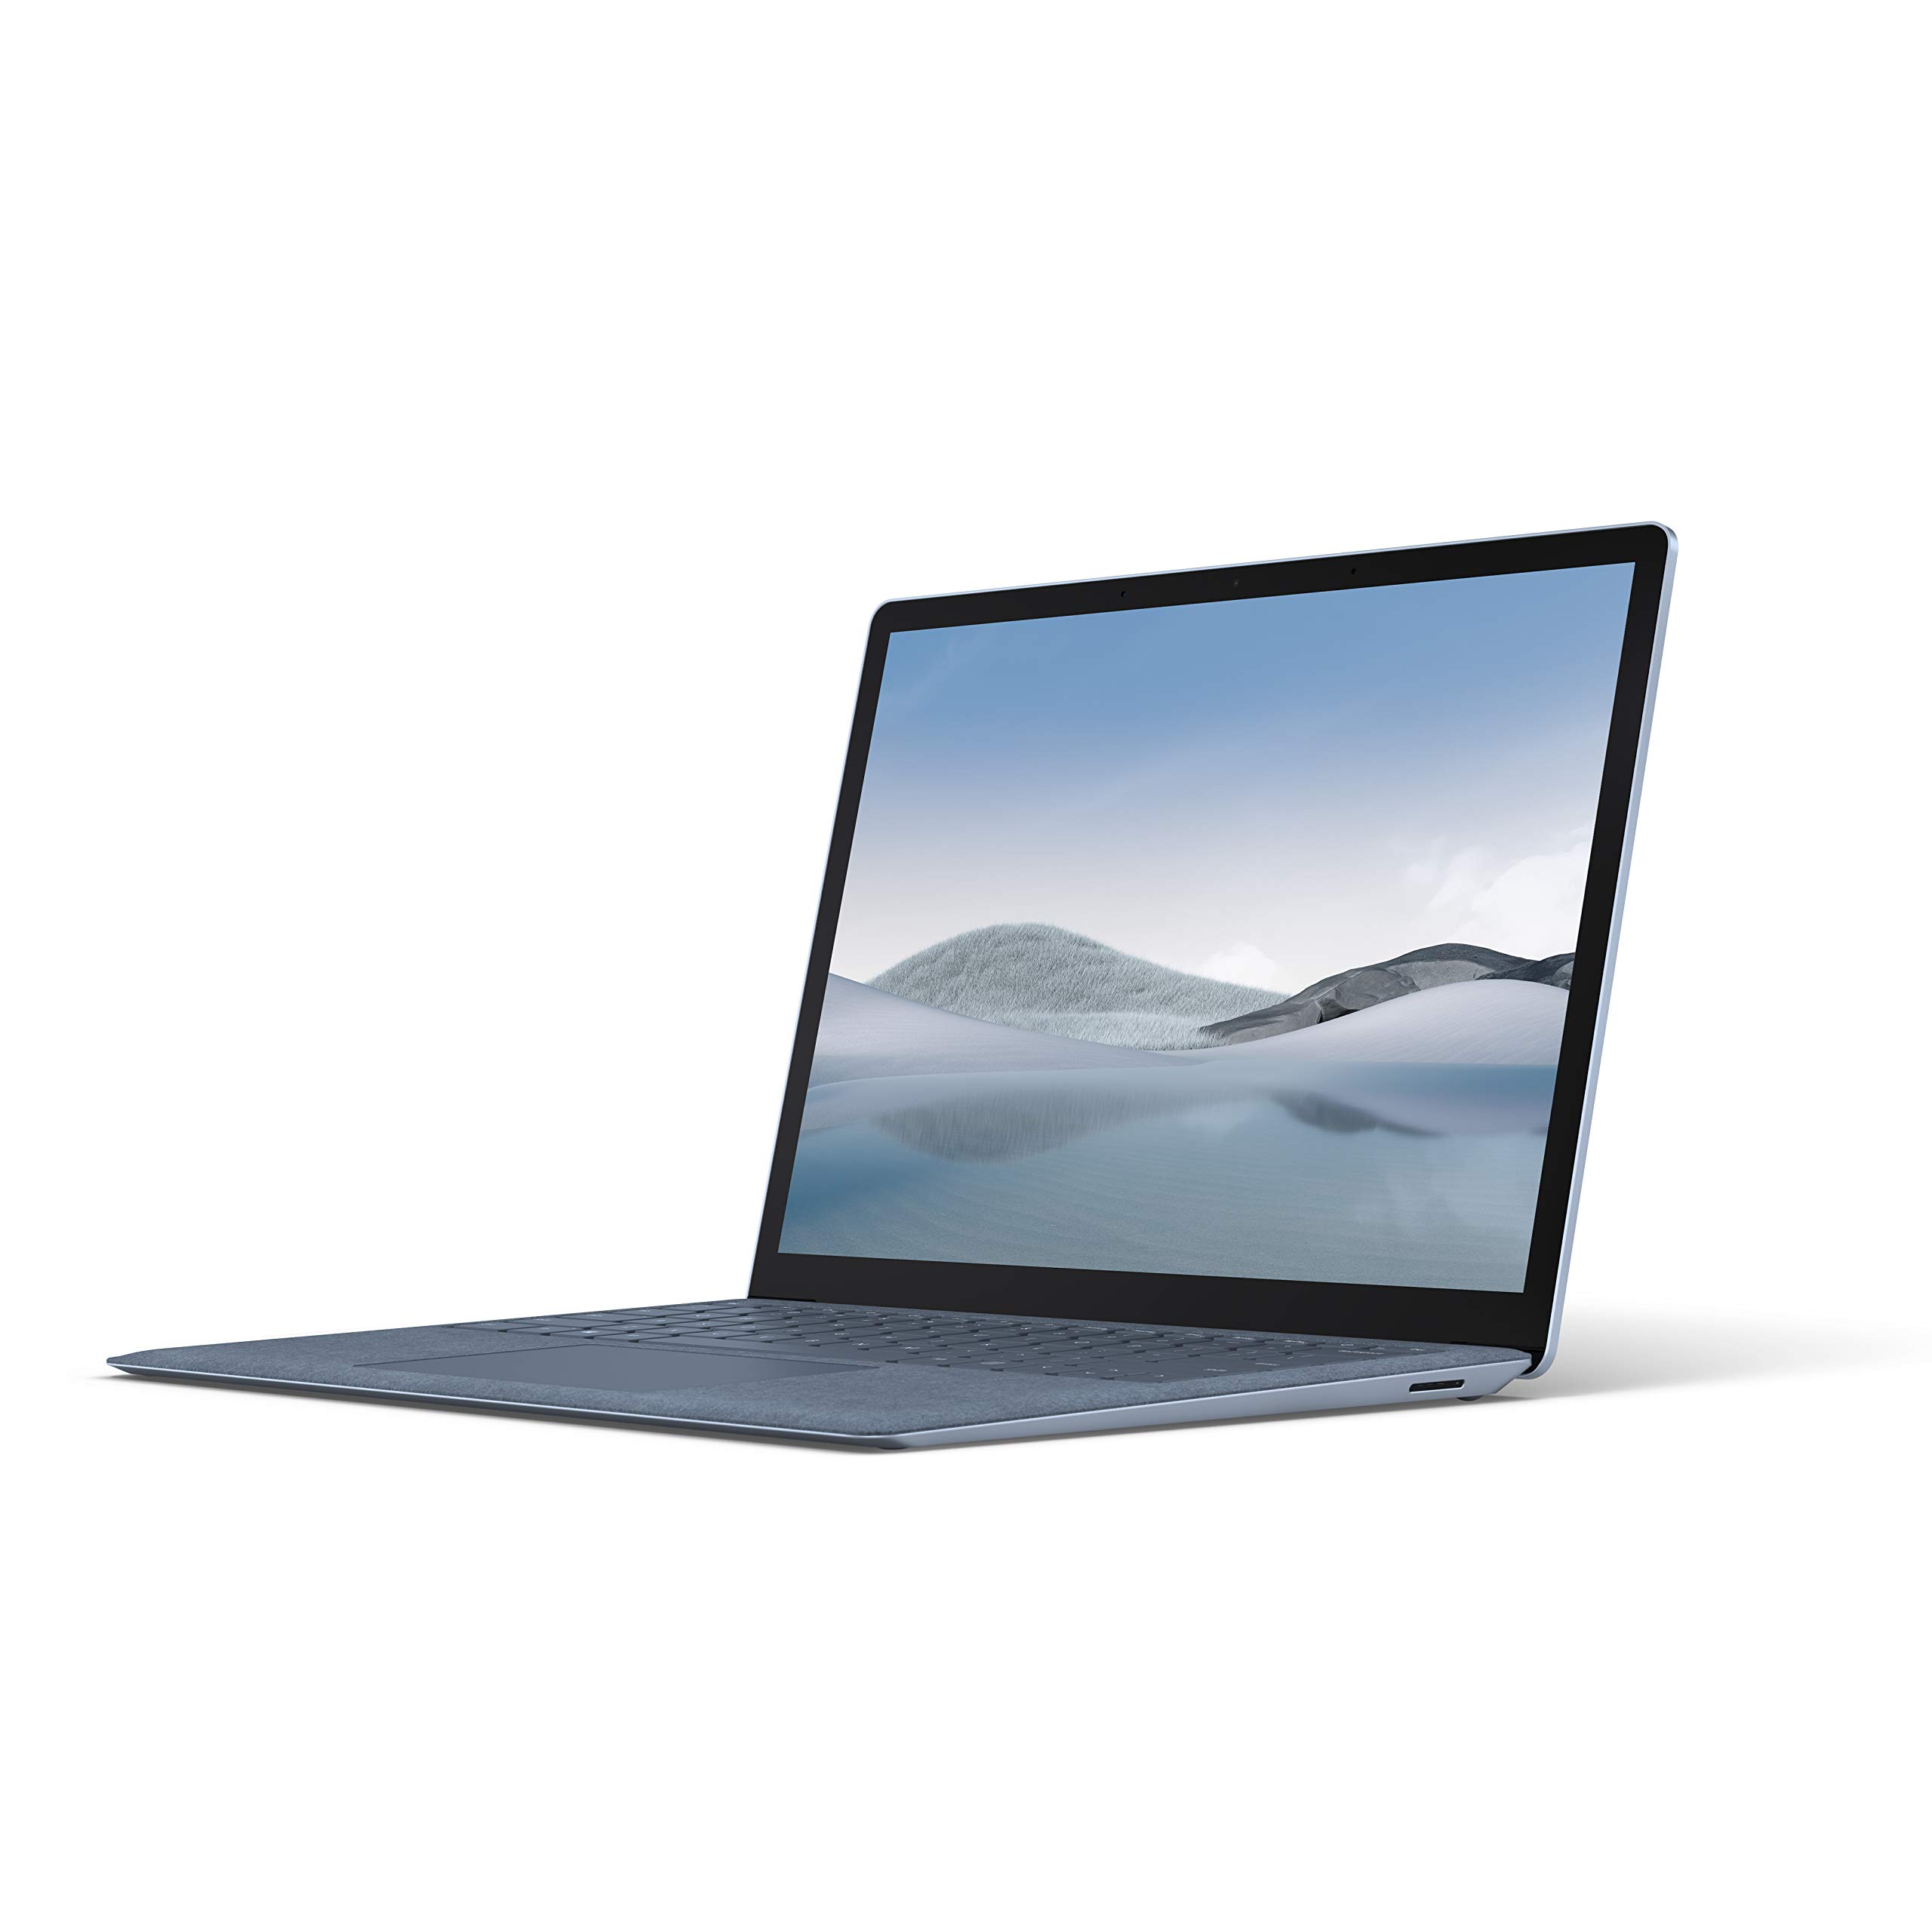 Microsoft Surface Laptop 4 13.5” Touch-Screen – Intel Core i5 - 8GB - 512GB Solid State Drive- Ice Blue